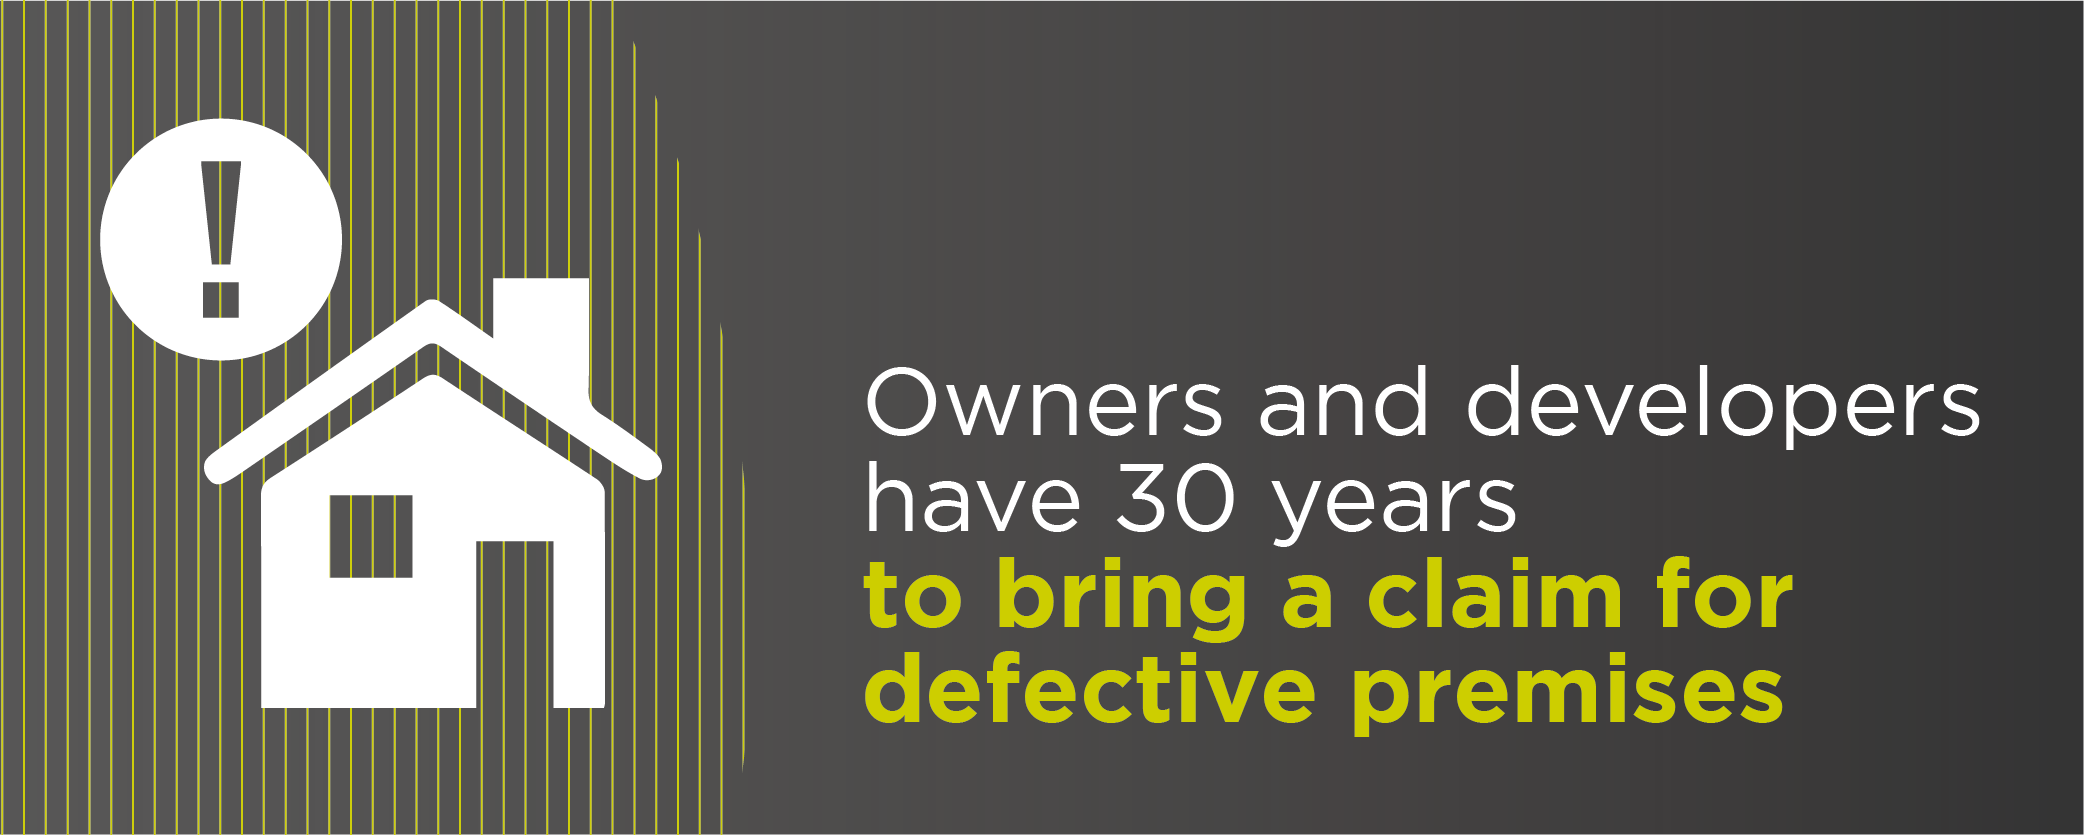 Owners and developers have 30 years to bring a claim for defective premises